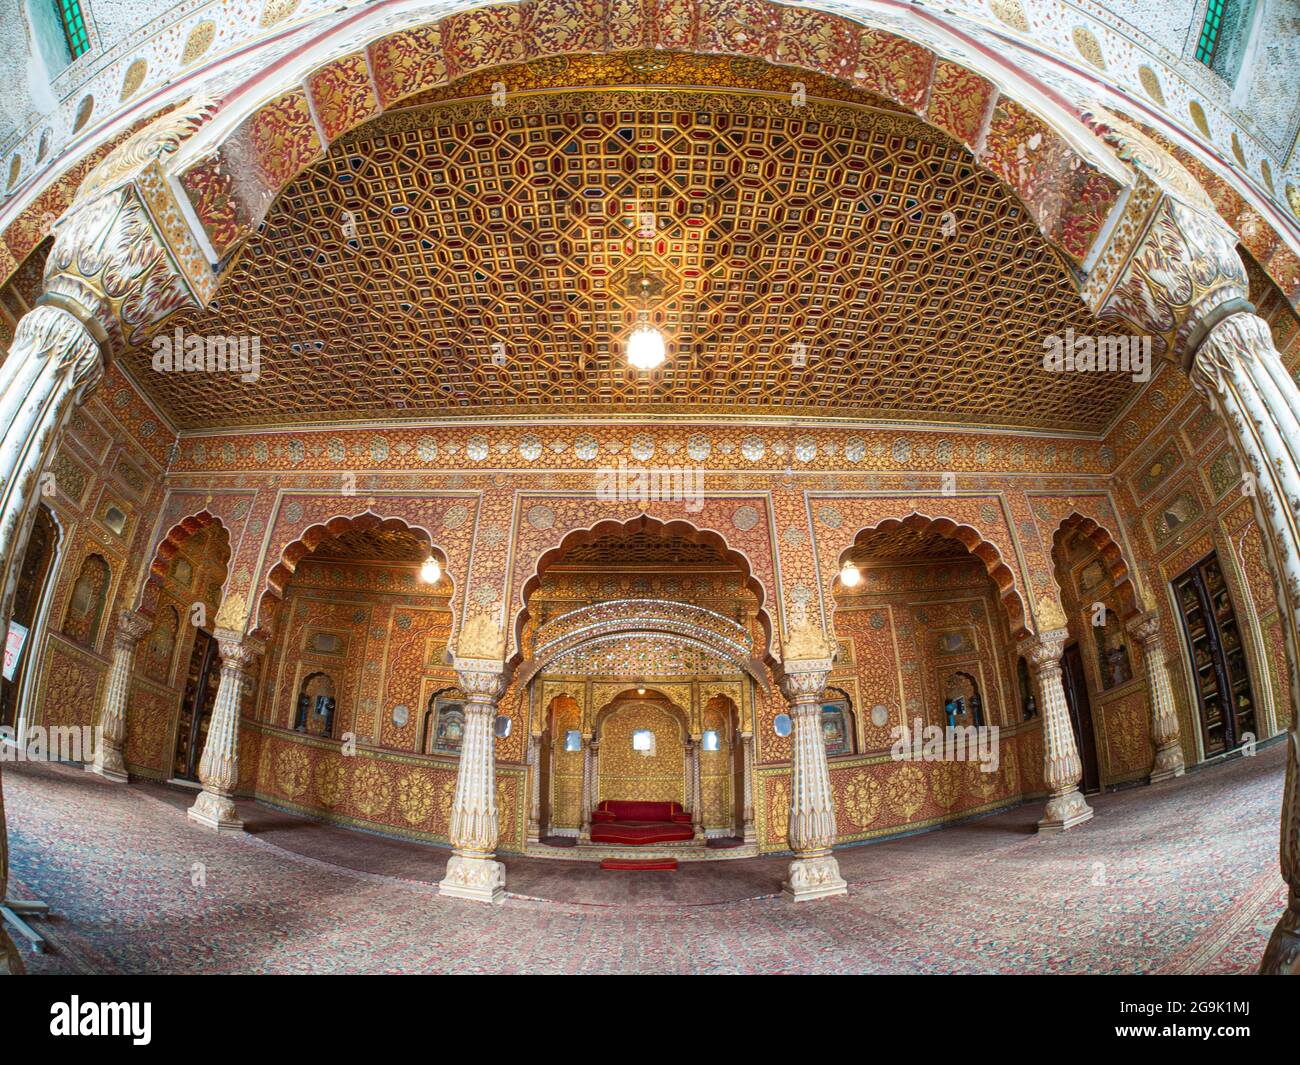 Private audience hall, Anup Mahal, with seating niche for the Maharaja, City Palace of Bikaner, Junagarh Fort, Rajasthan, India Stock Photo